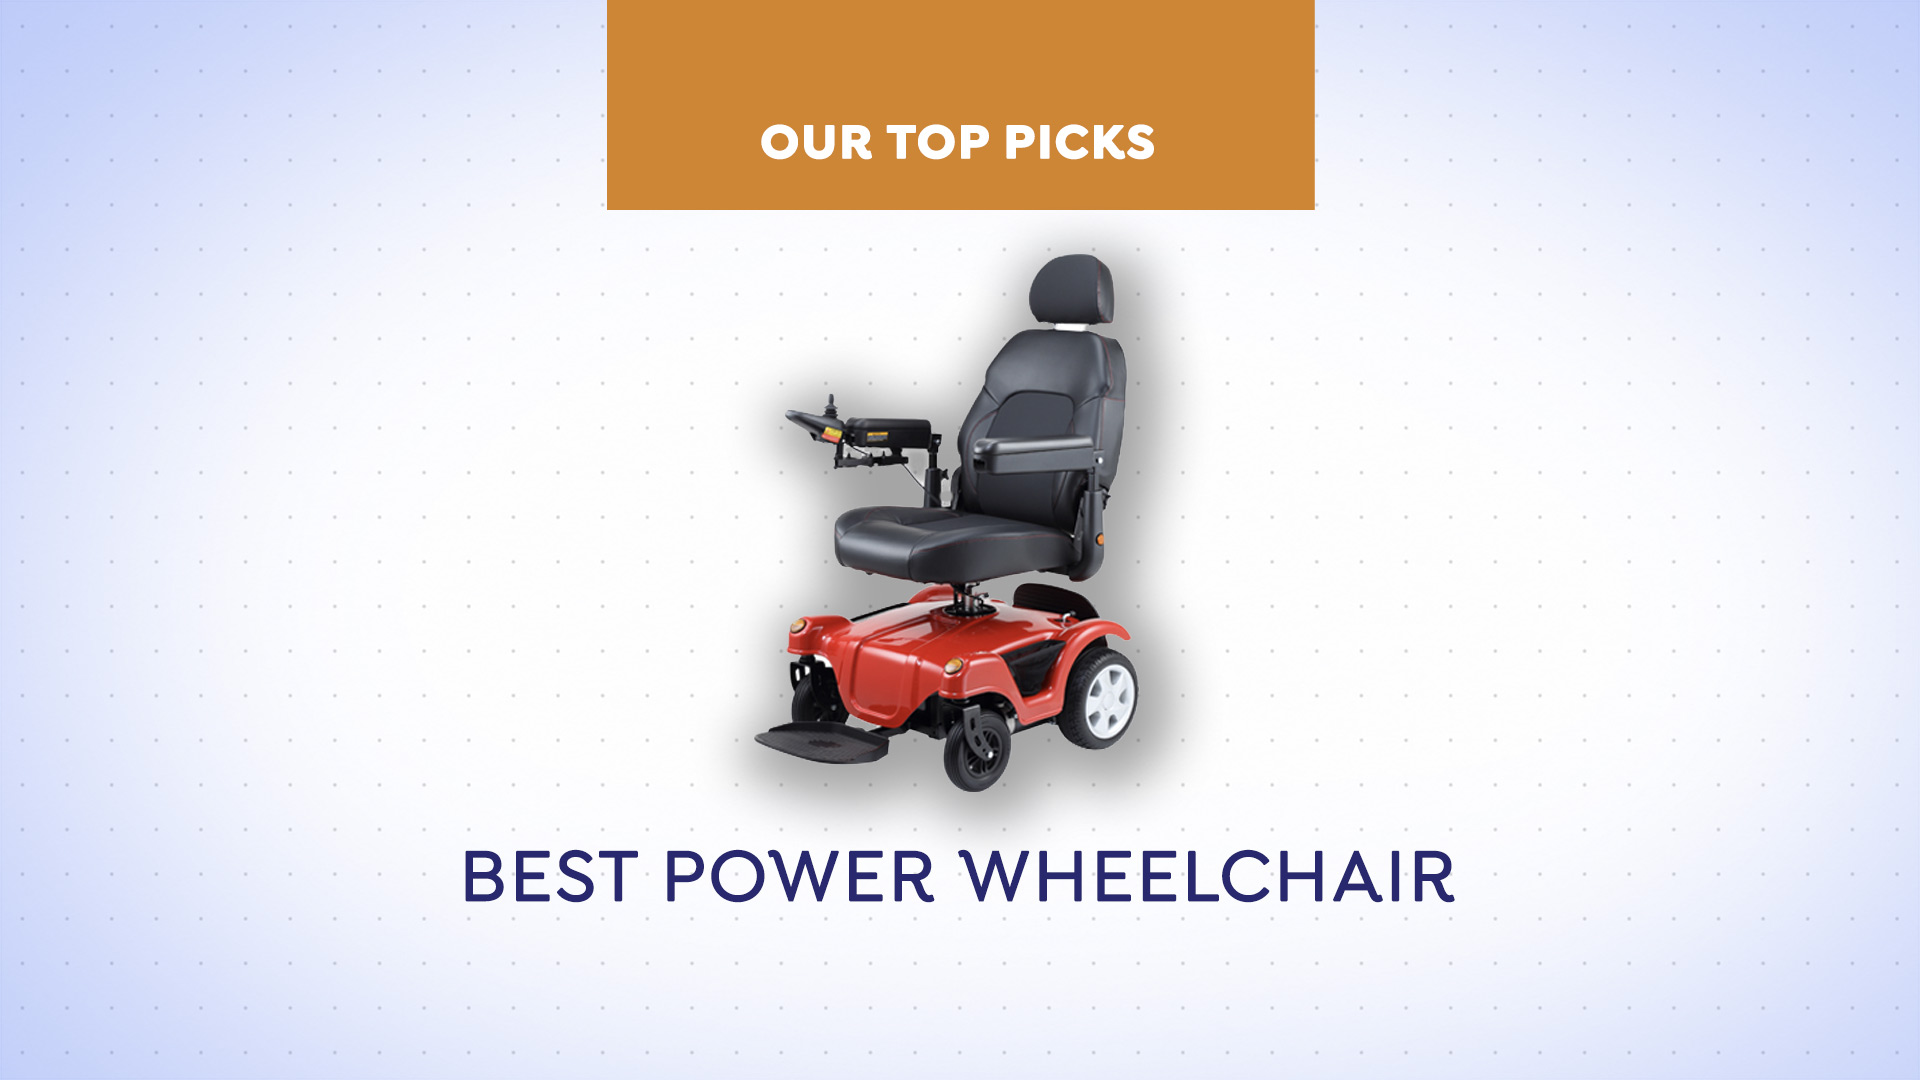 Best Medical Scooter: Top Picks for Your Mobility Needs